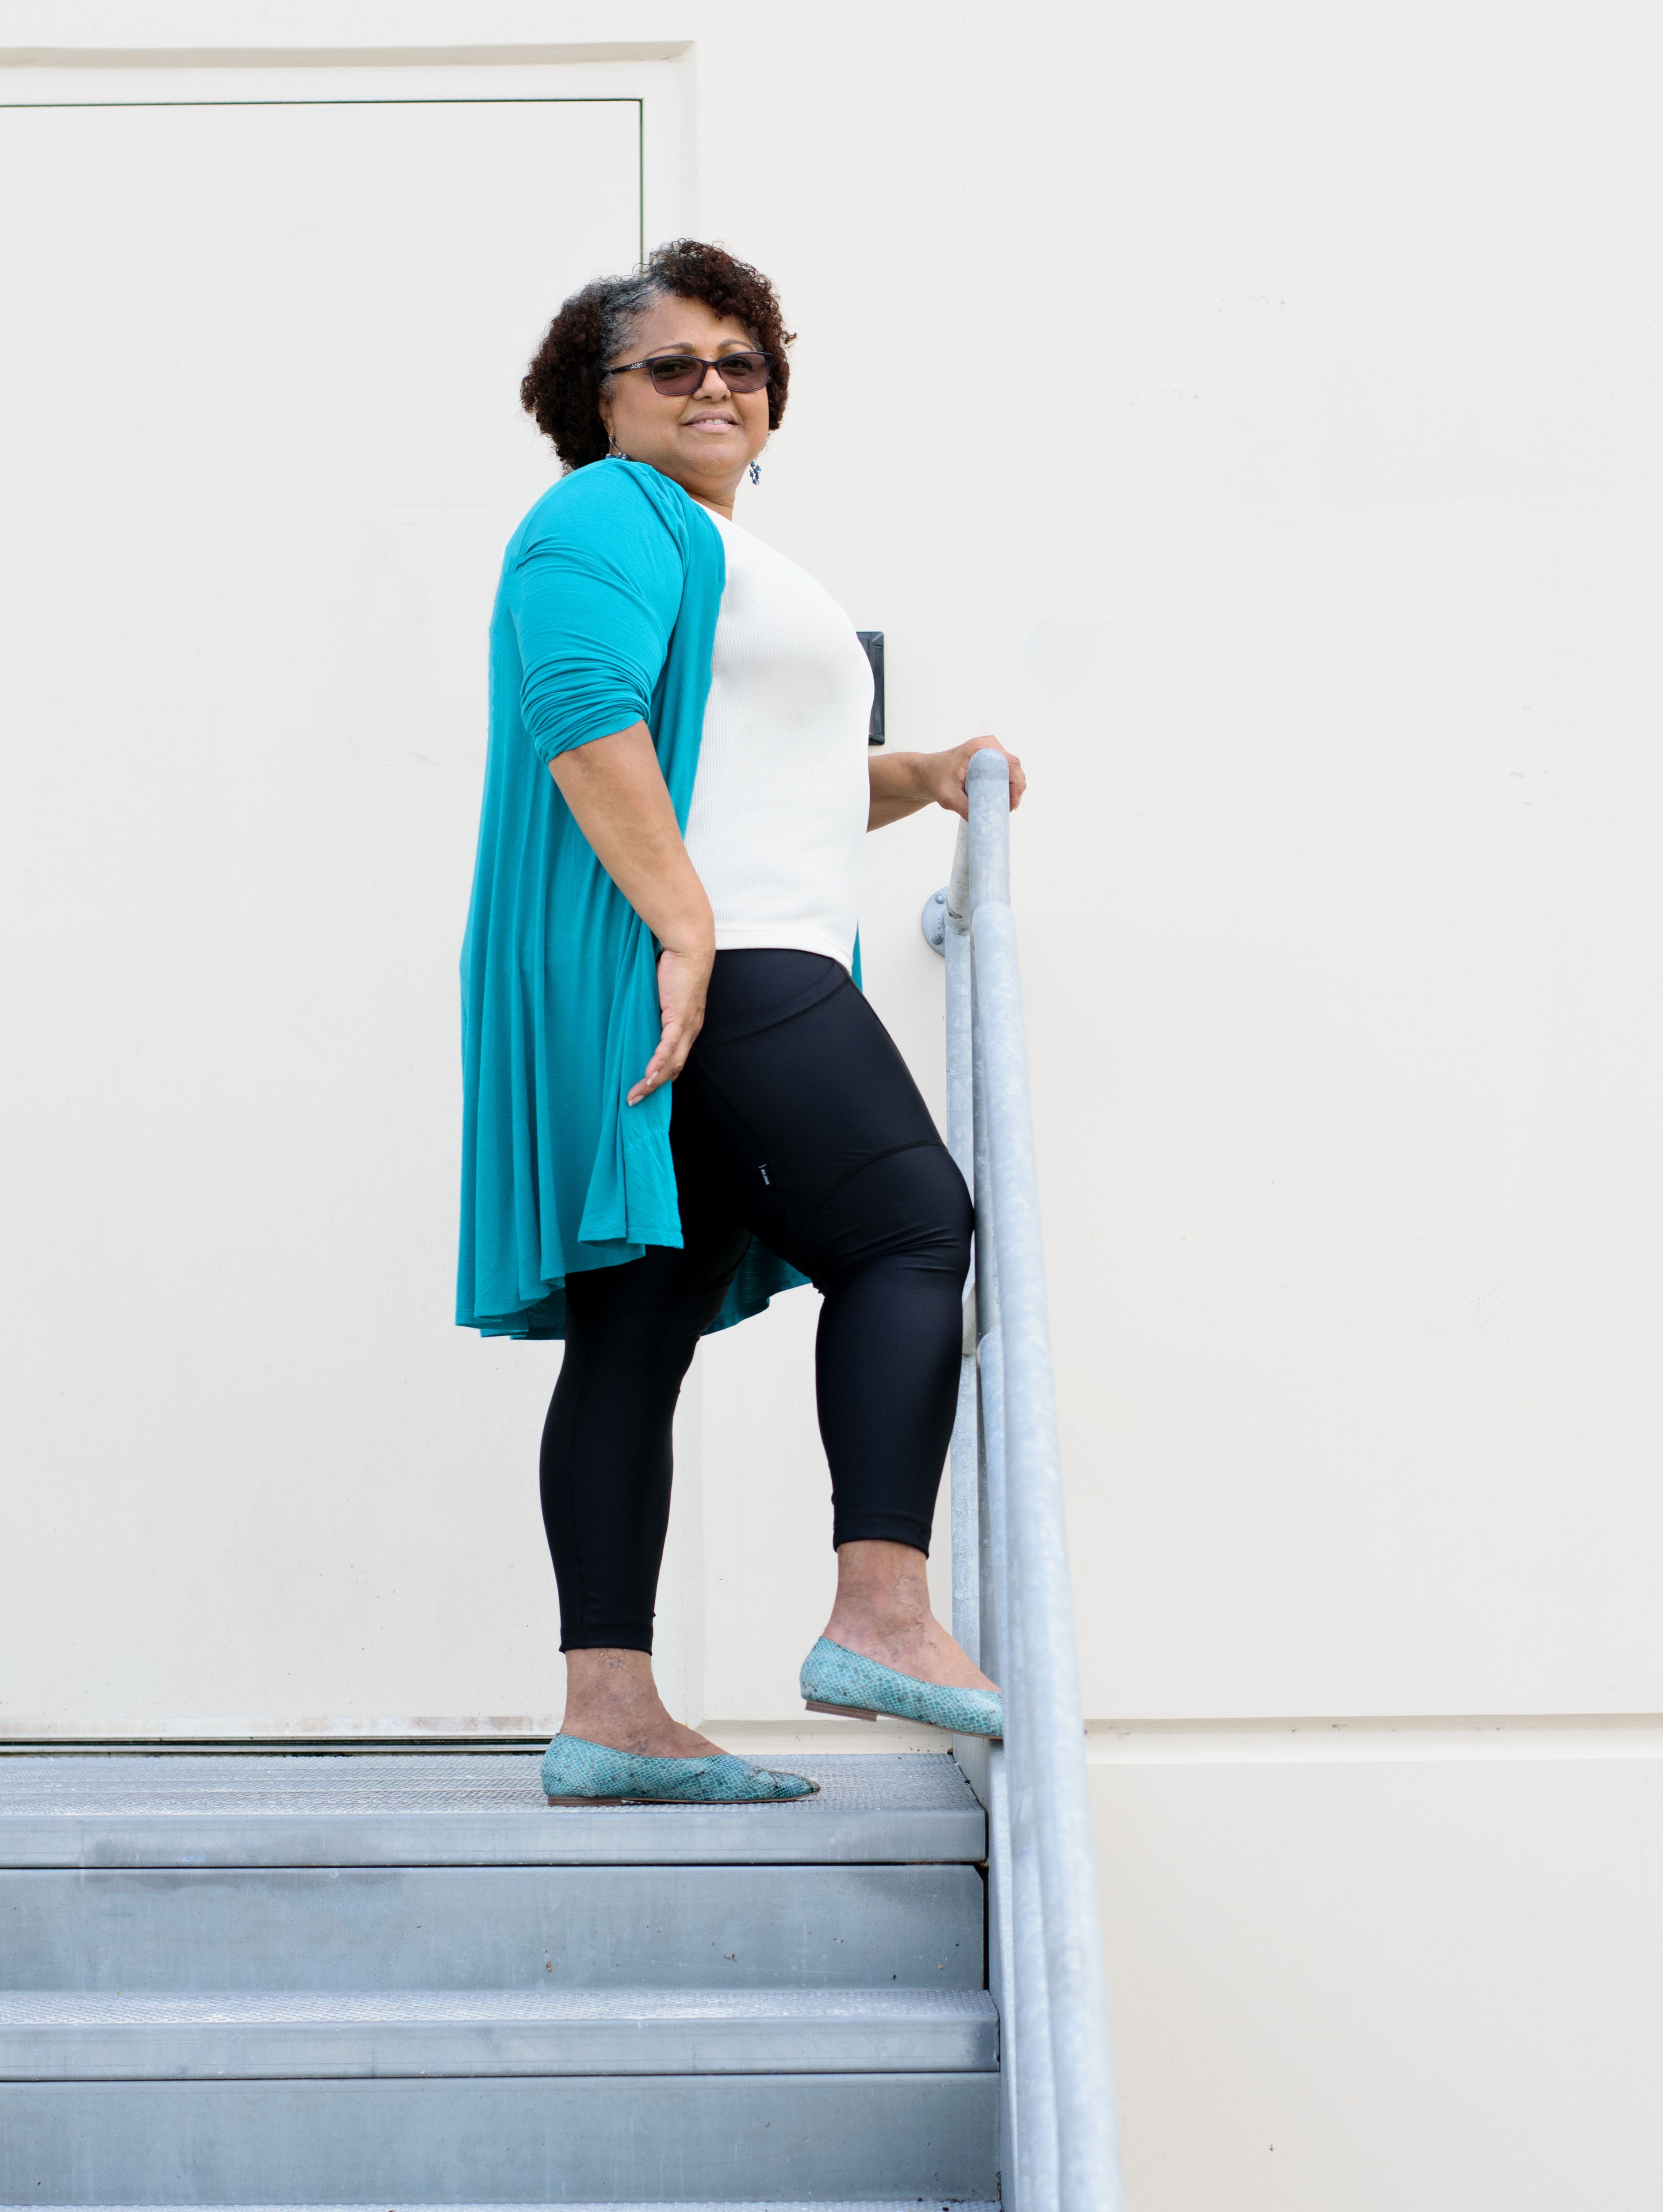 Model with foot on railing wearing black capris